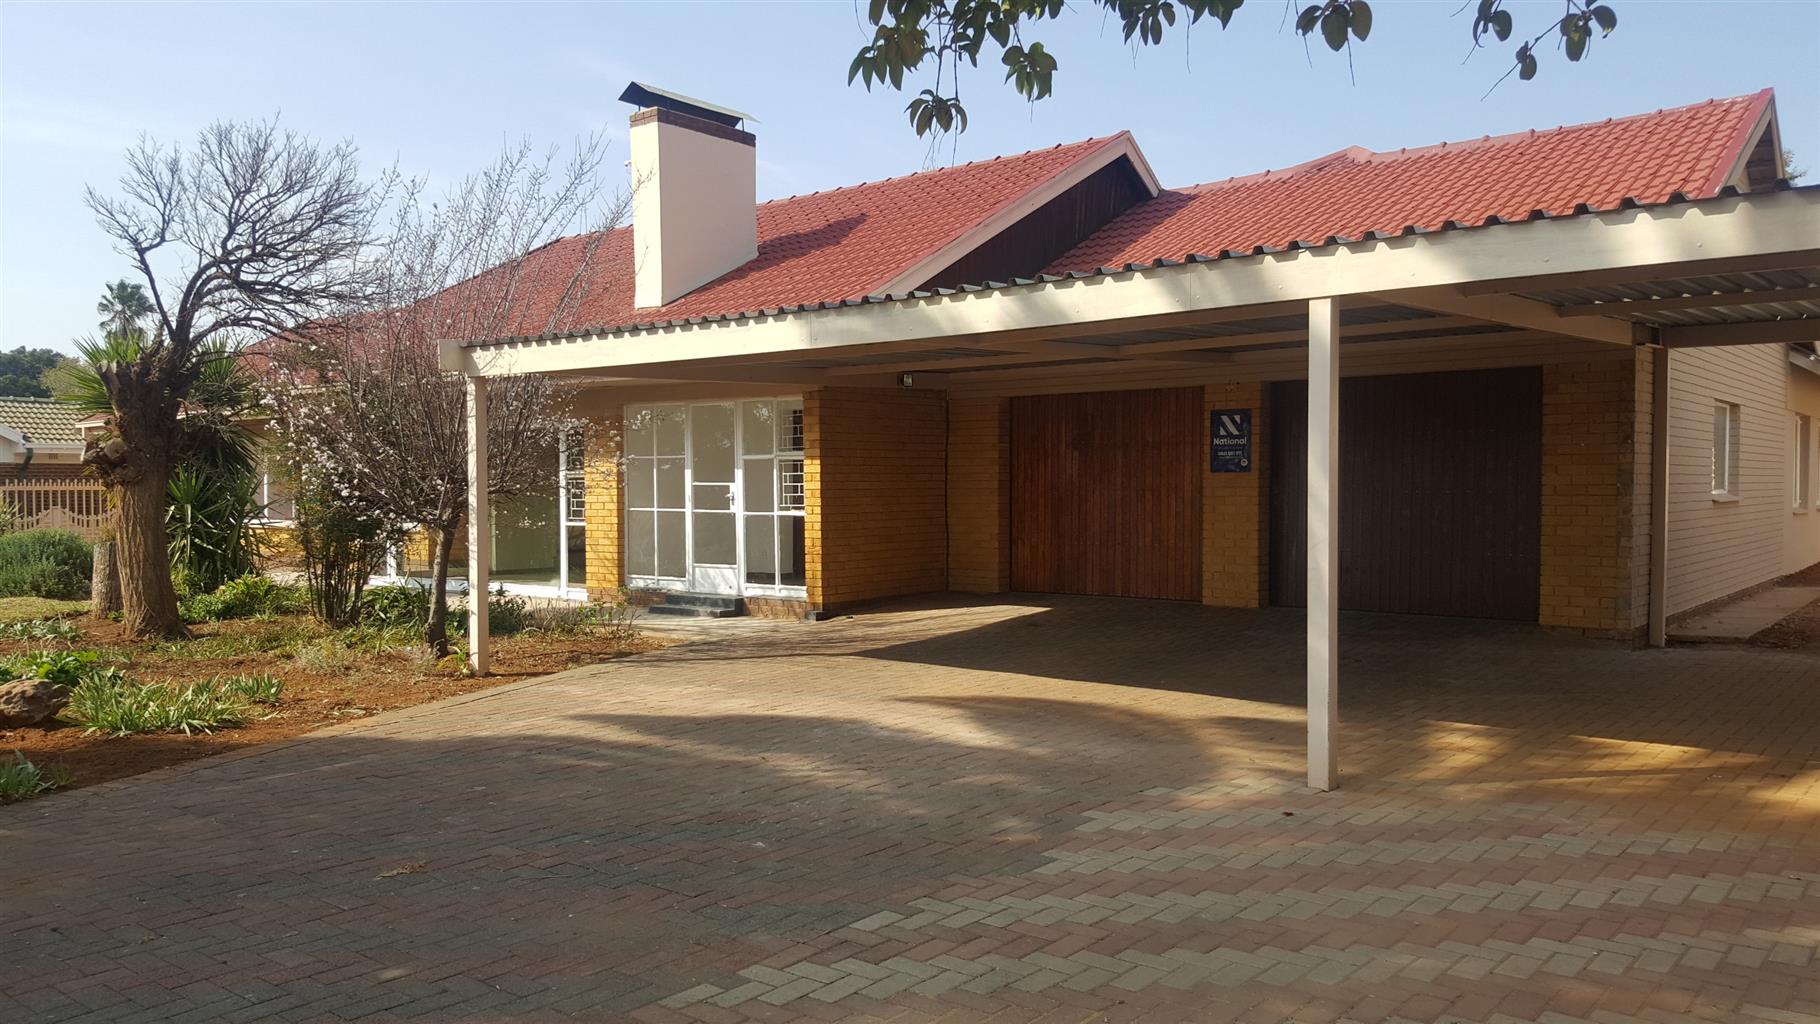 Ultra Spacious 4 Bedroom Duet House For Rent Fichardtpark Bloemfontein Pre Paid Electricity Water Included Junk Mail